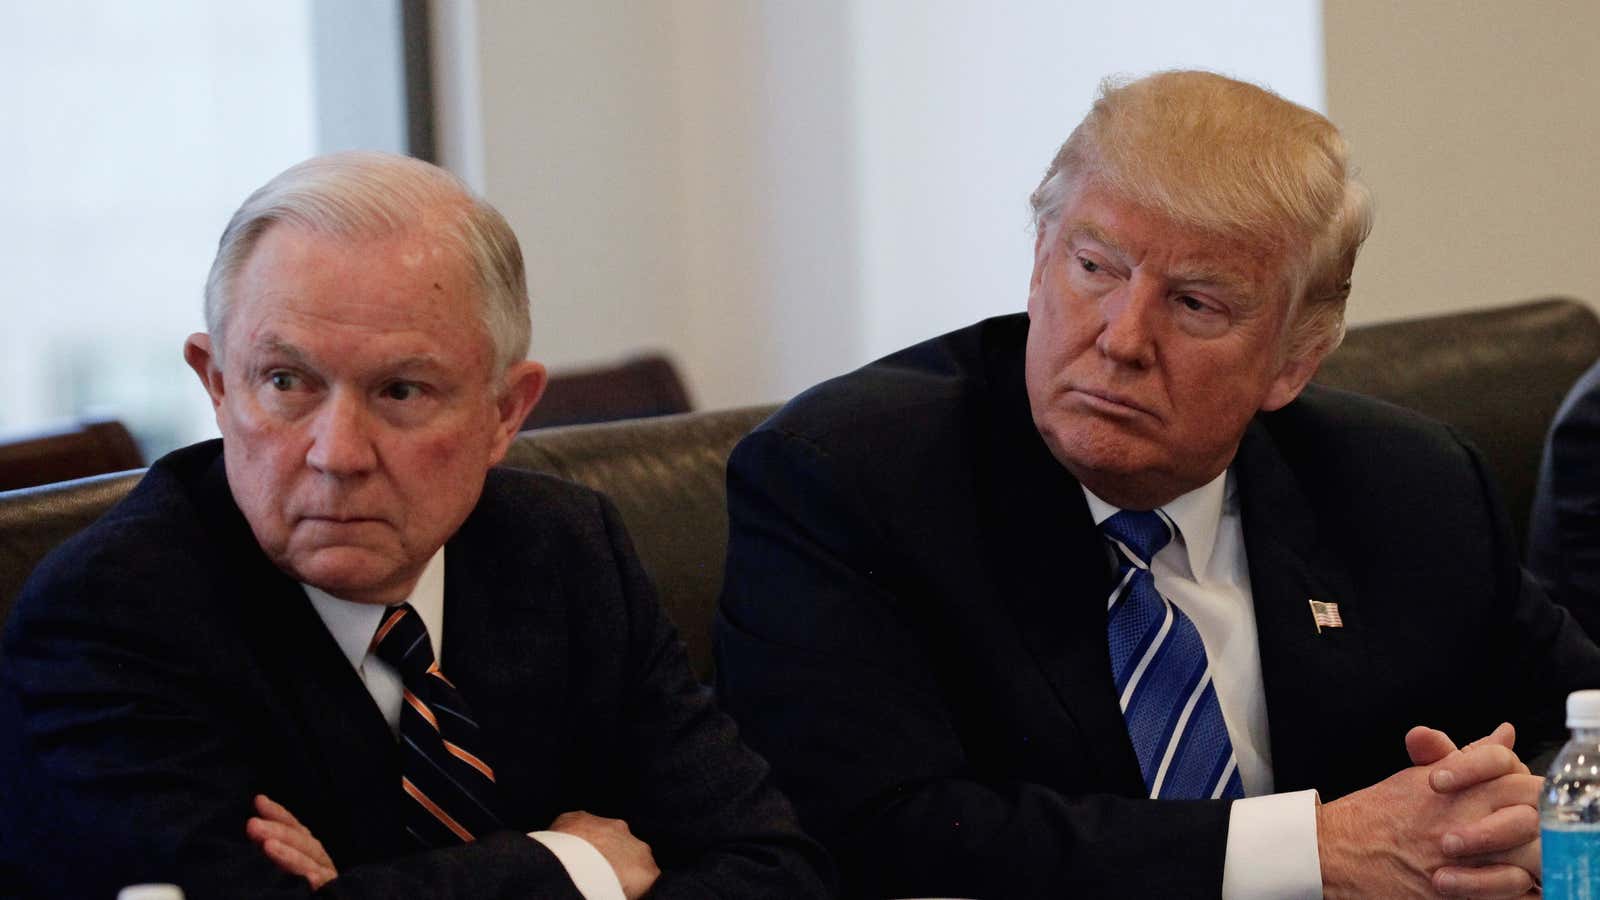 Trump and Sessions in December.